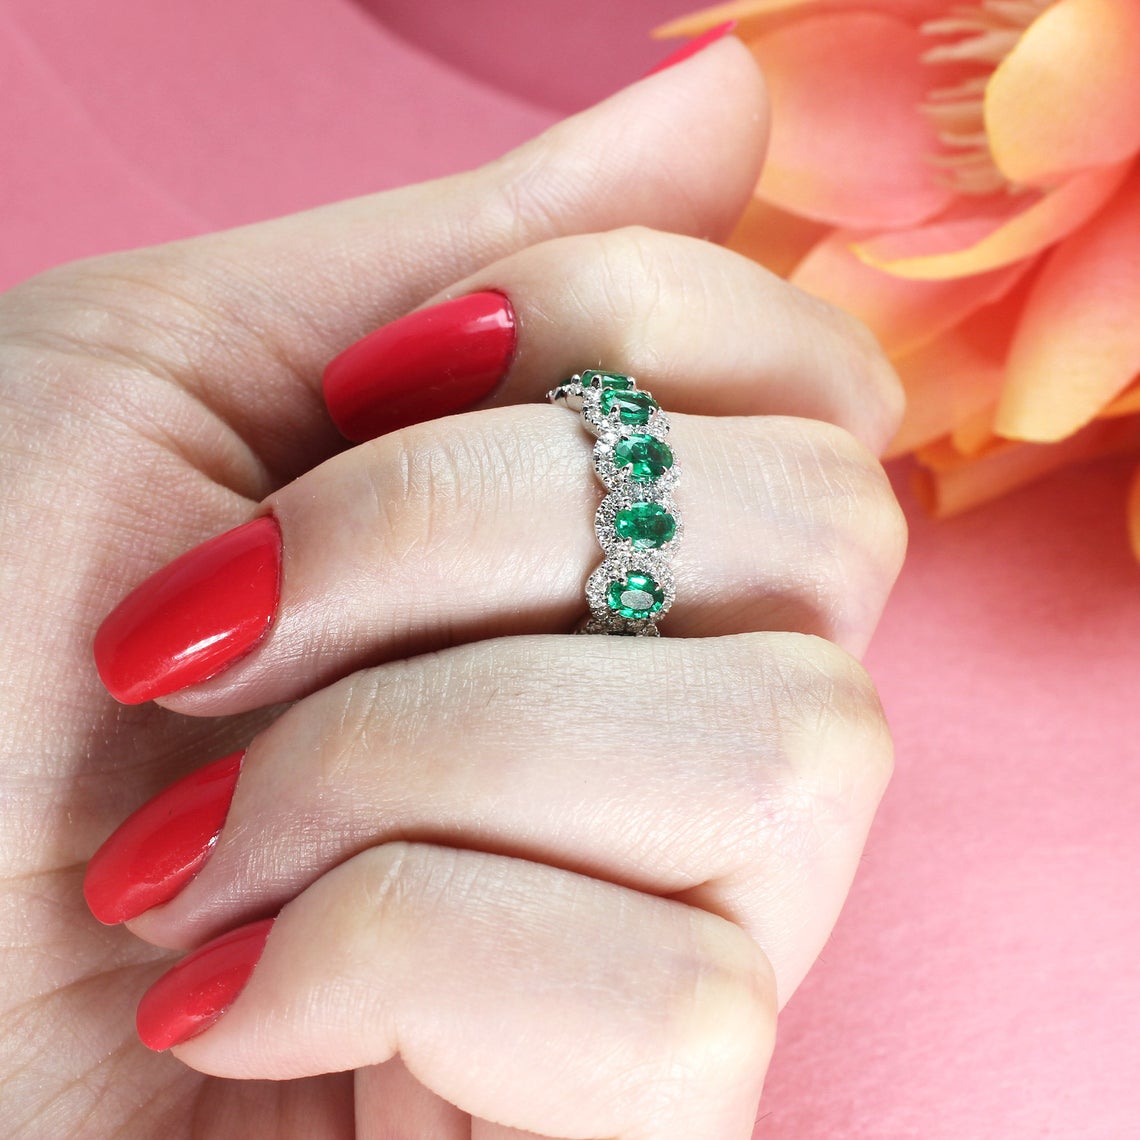 2.50 ct. Genuine Oval Emerald Eternity Ring With 0.70 ct. Diamond Halo-in 14K/18K White, Yellow, Rose Gold and Platinum - Christmas Jewelry Gift -VIRABYANI